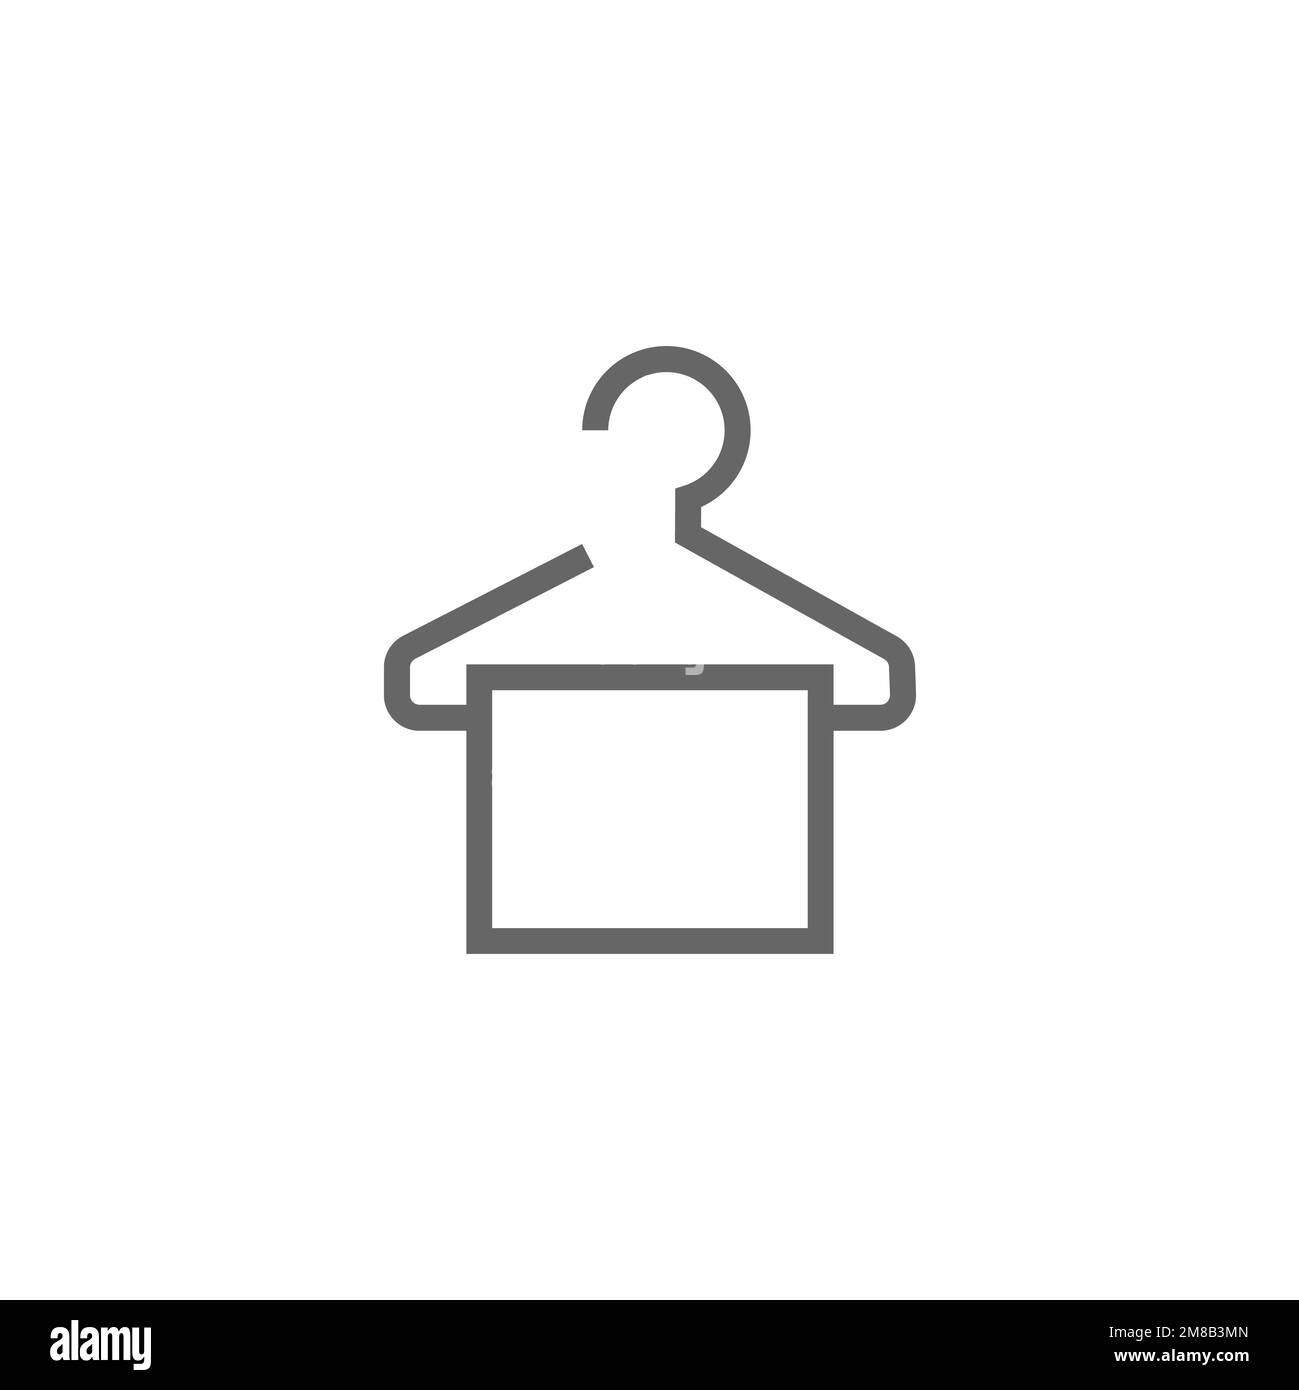 Hanger icon, hanging graphic resource mockup, vector illustration. Stock Vector